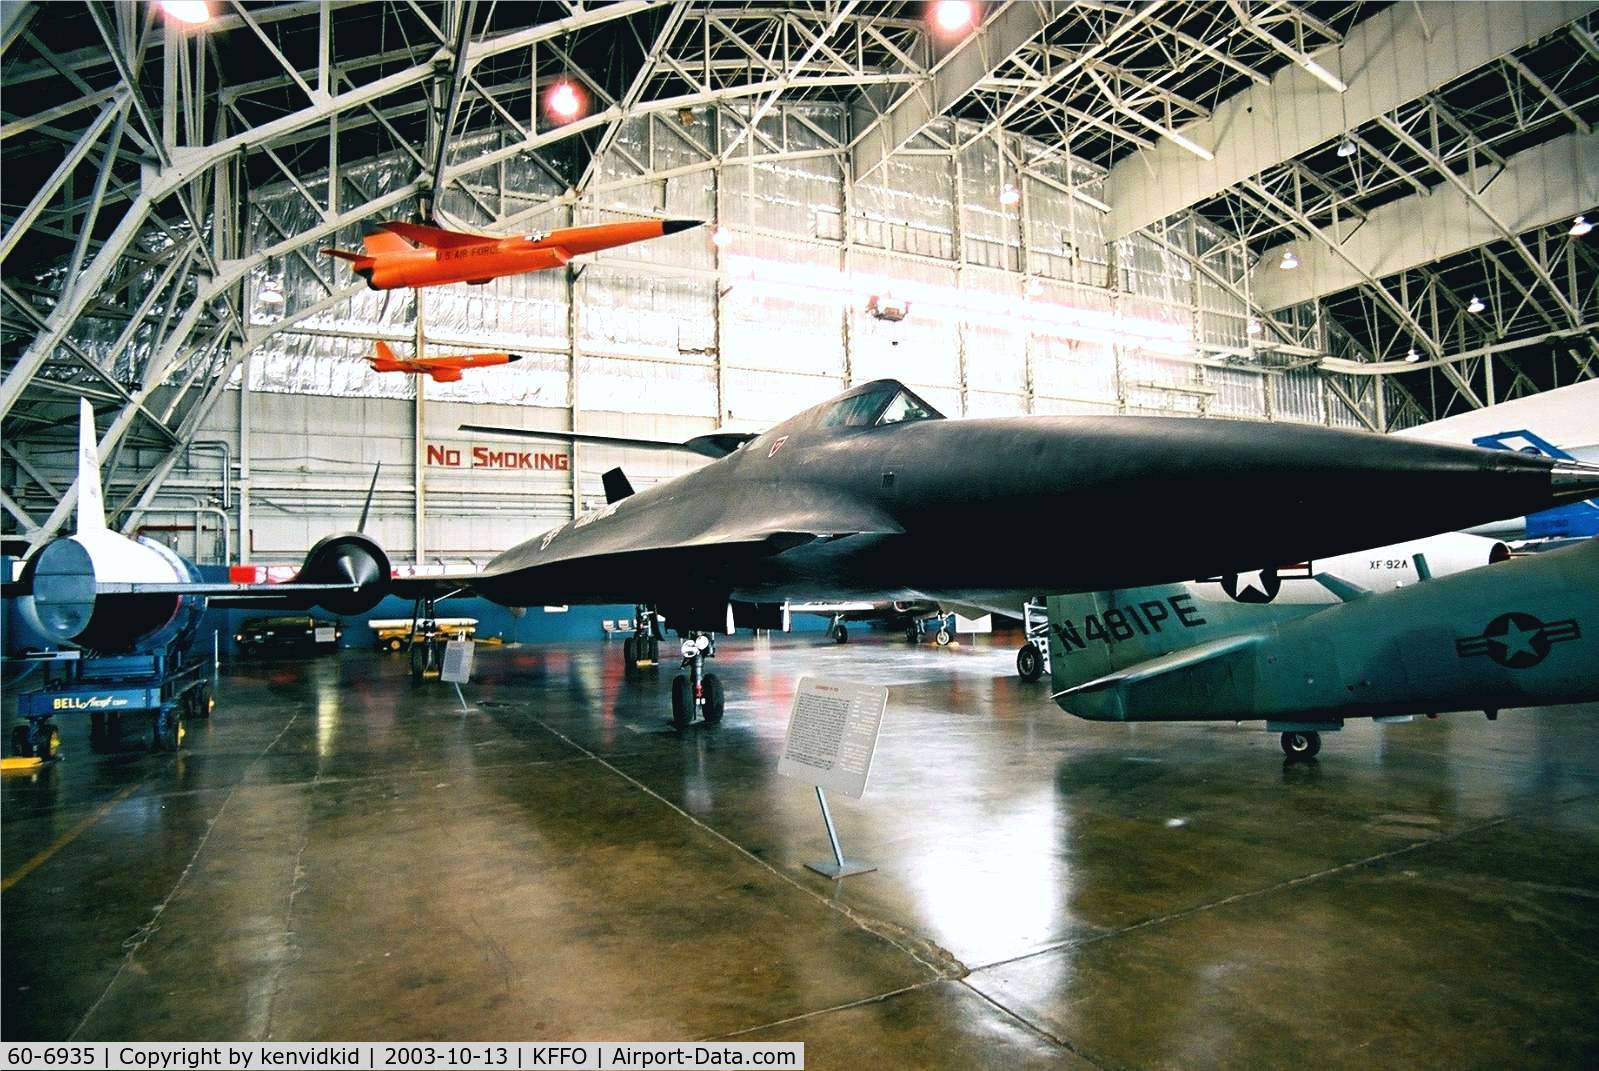 60-6935, 1963 Lockheed YF-12A C/N 1002, At the Museum of the United States Air Force Dayton Ohio.